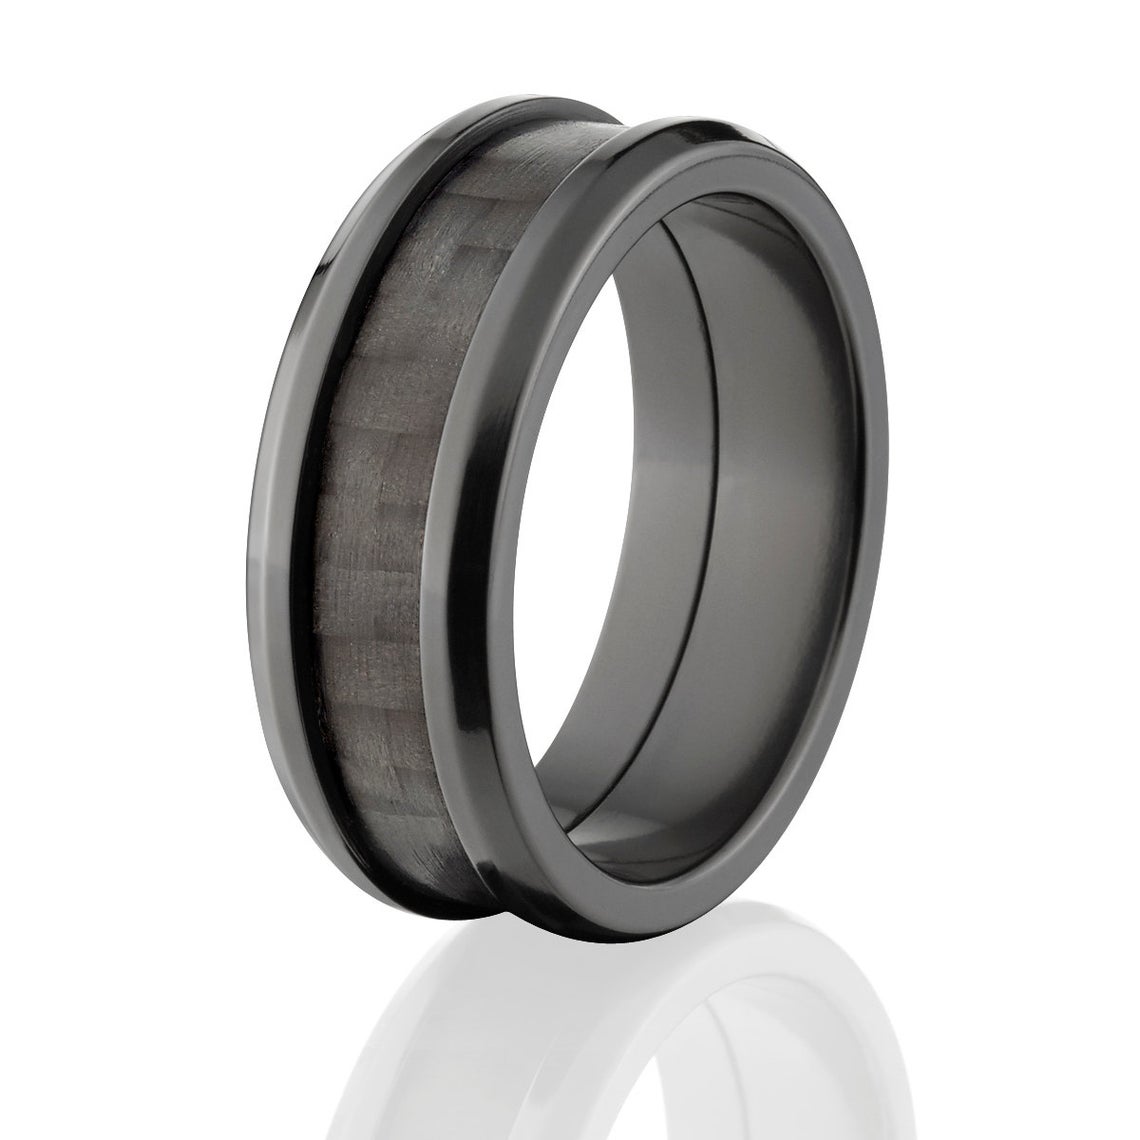 8mm wide black zirconium ring with a black carbon fiber inlay